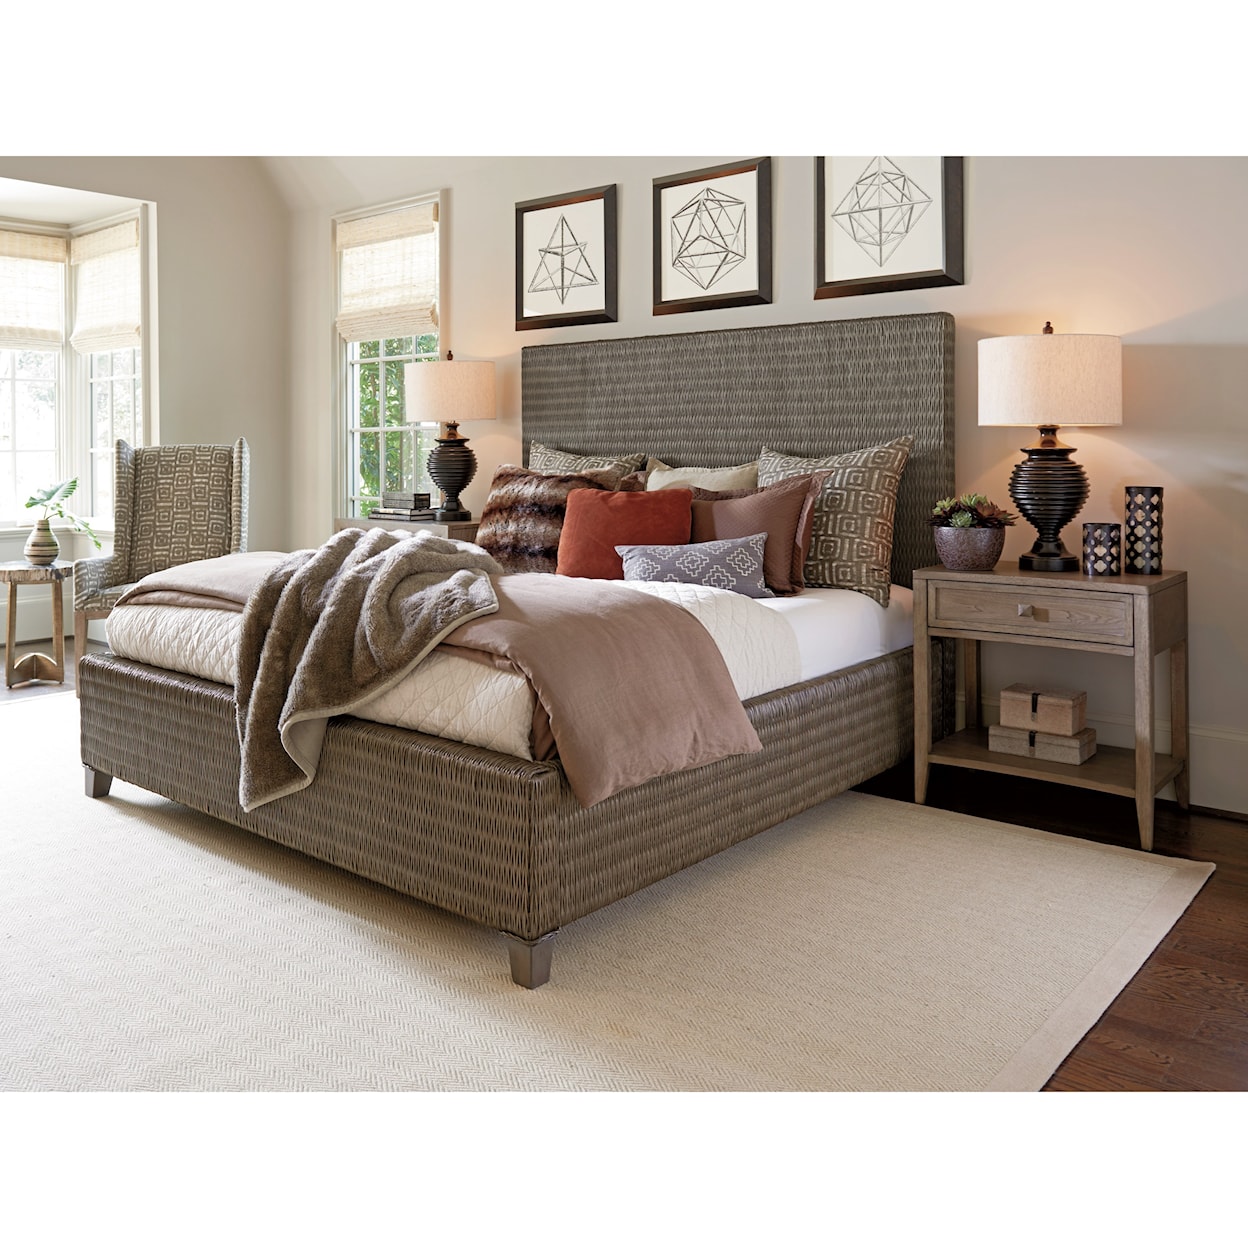 Tommy Bahama Home Cypress Point Cali King Bedroom Group